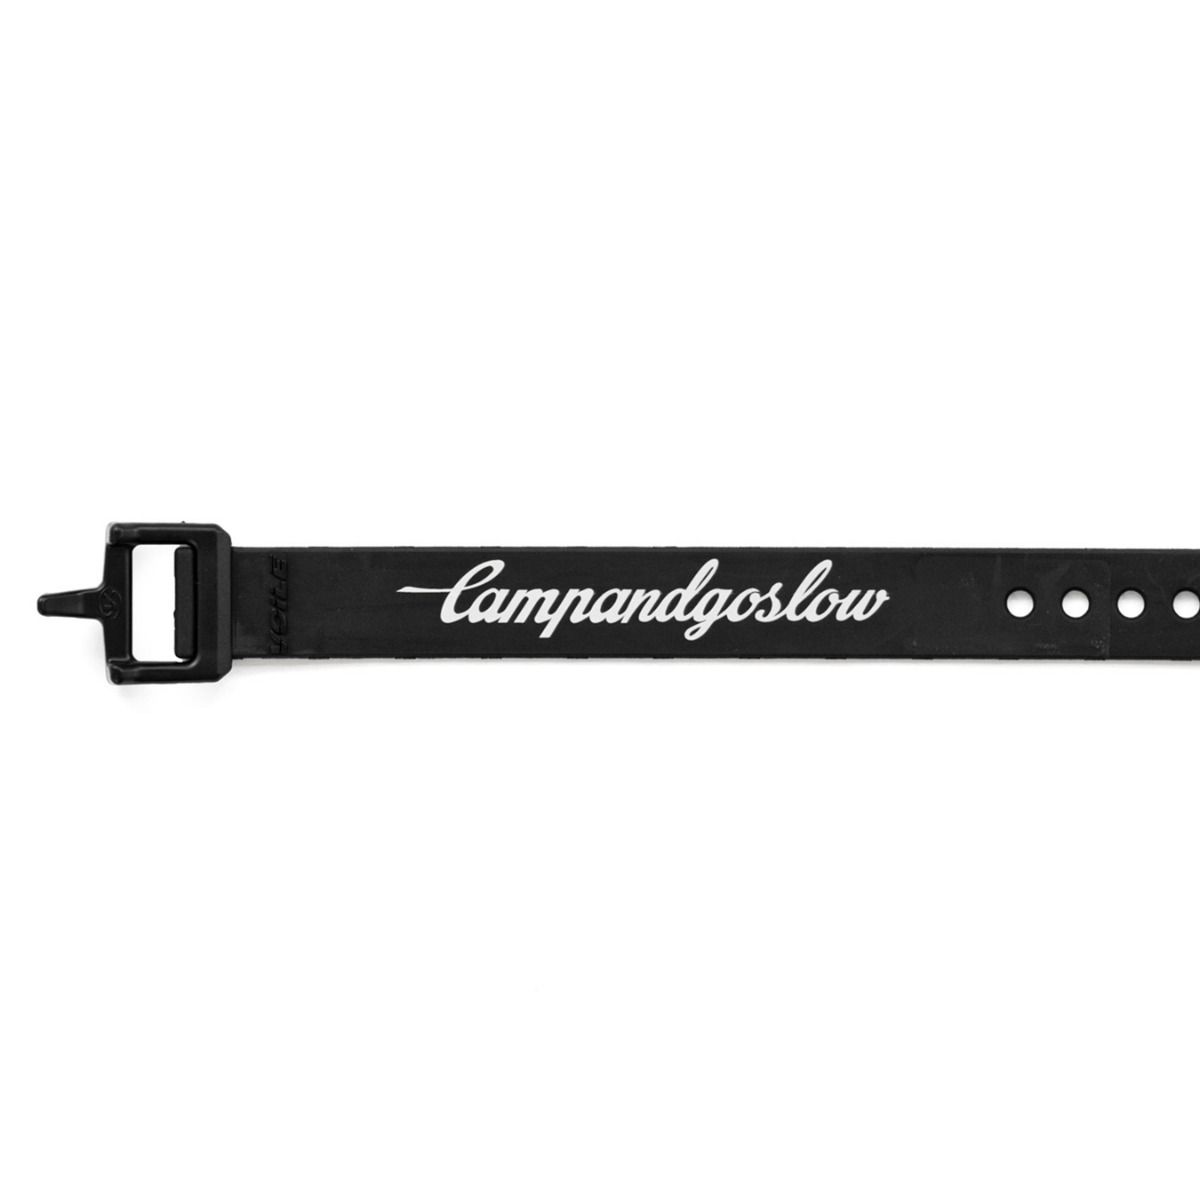 *CAMP AND GO SLOW* 15inch voile strap (black)